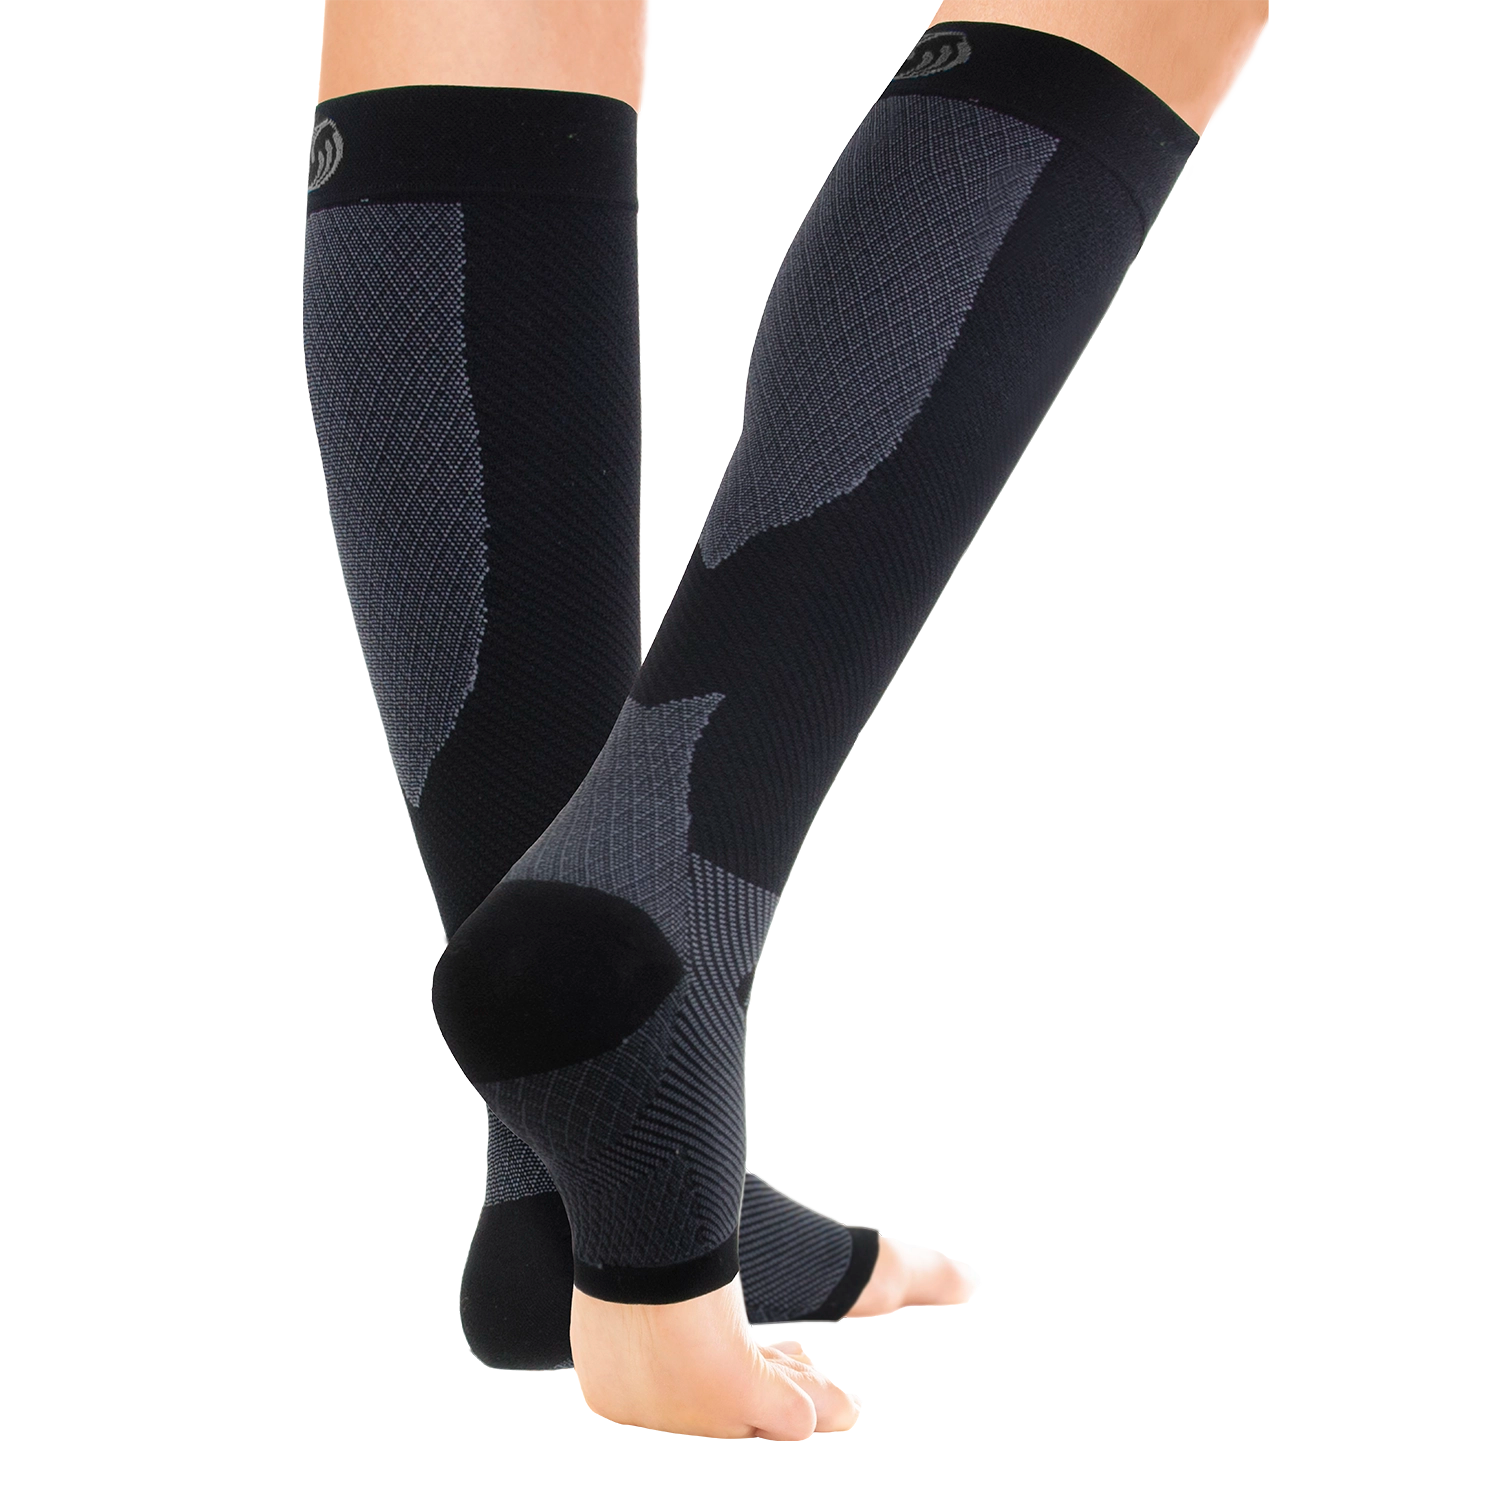  4 Pairs Calf Compression Sleeve Leg Compression Sock Calf  And Shin Support Relieve Calf Pain For Men Women Youth For